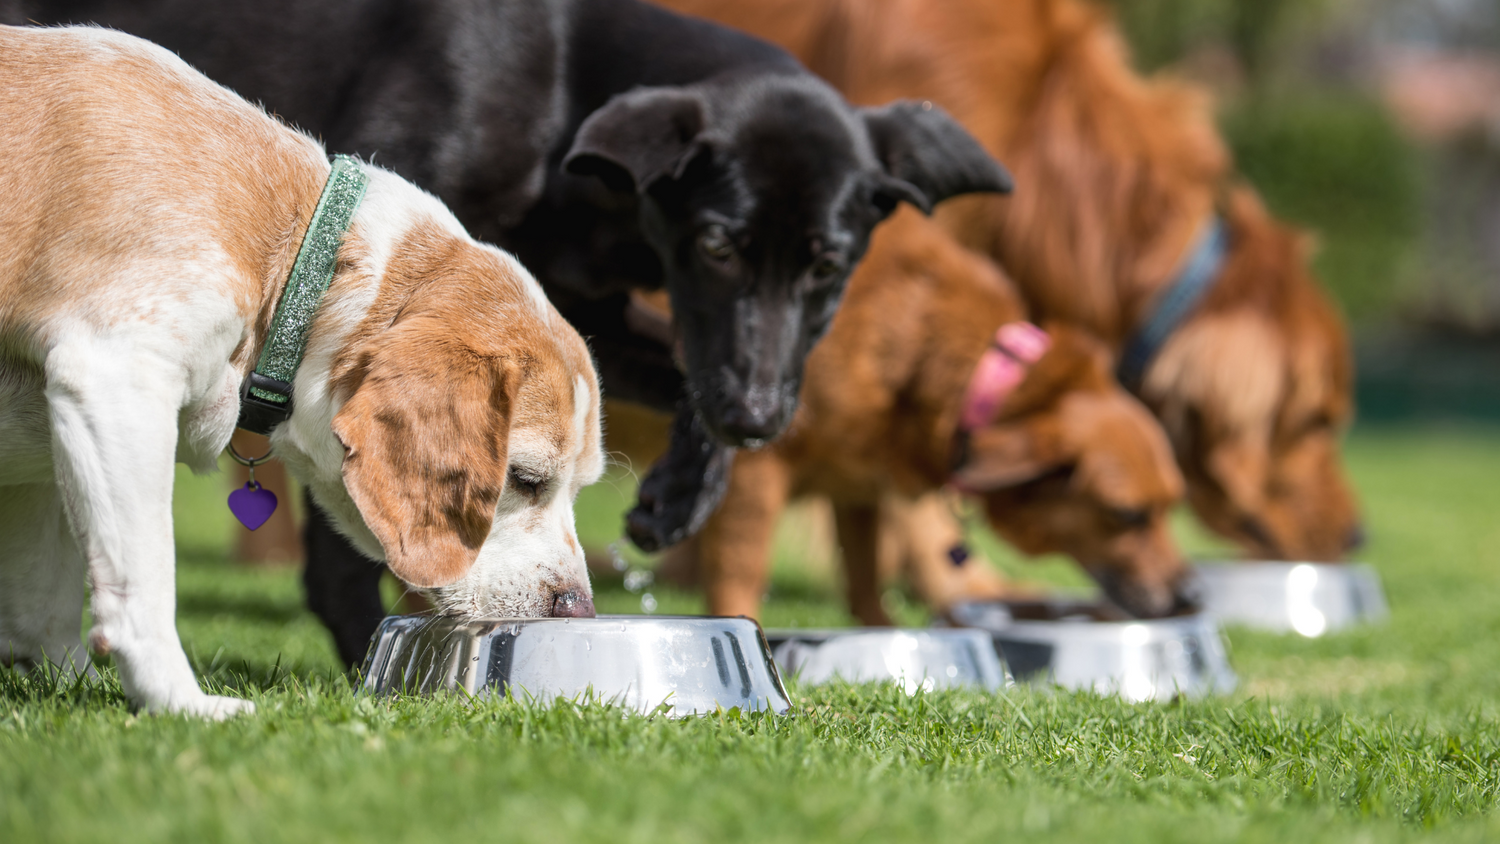 row of dogs all eating from silver bowl on grass 